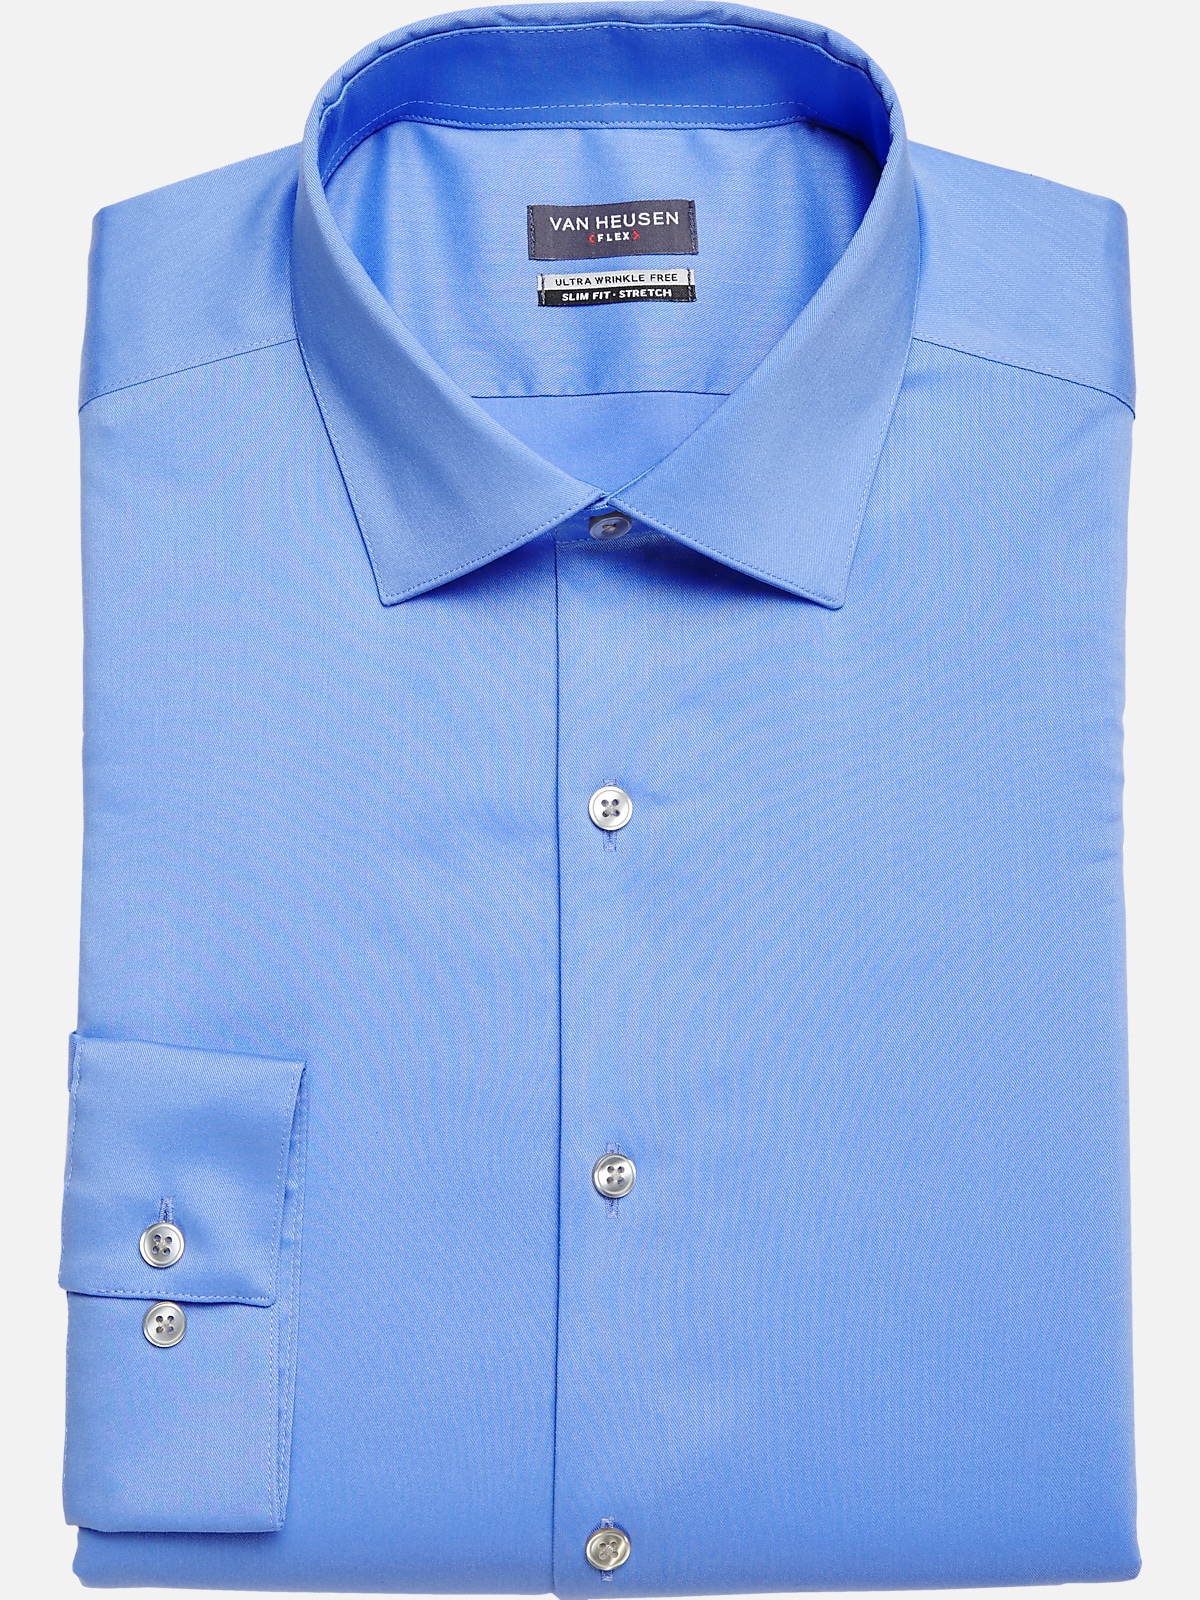 https://image.menswearhouse.com/is/image/TMW/TMW_5ET0_02_VAN_HEUSEN_DRESS_SHIRTS_BLUE_FROST_MAIN?imPolicy=pdp-zoom-mob